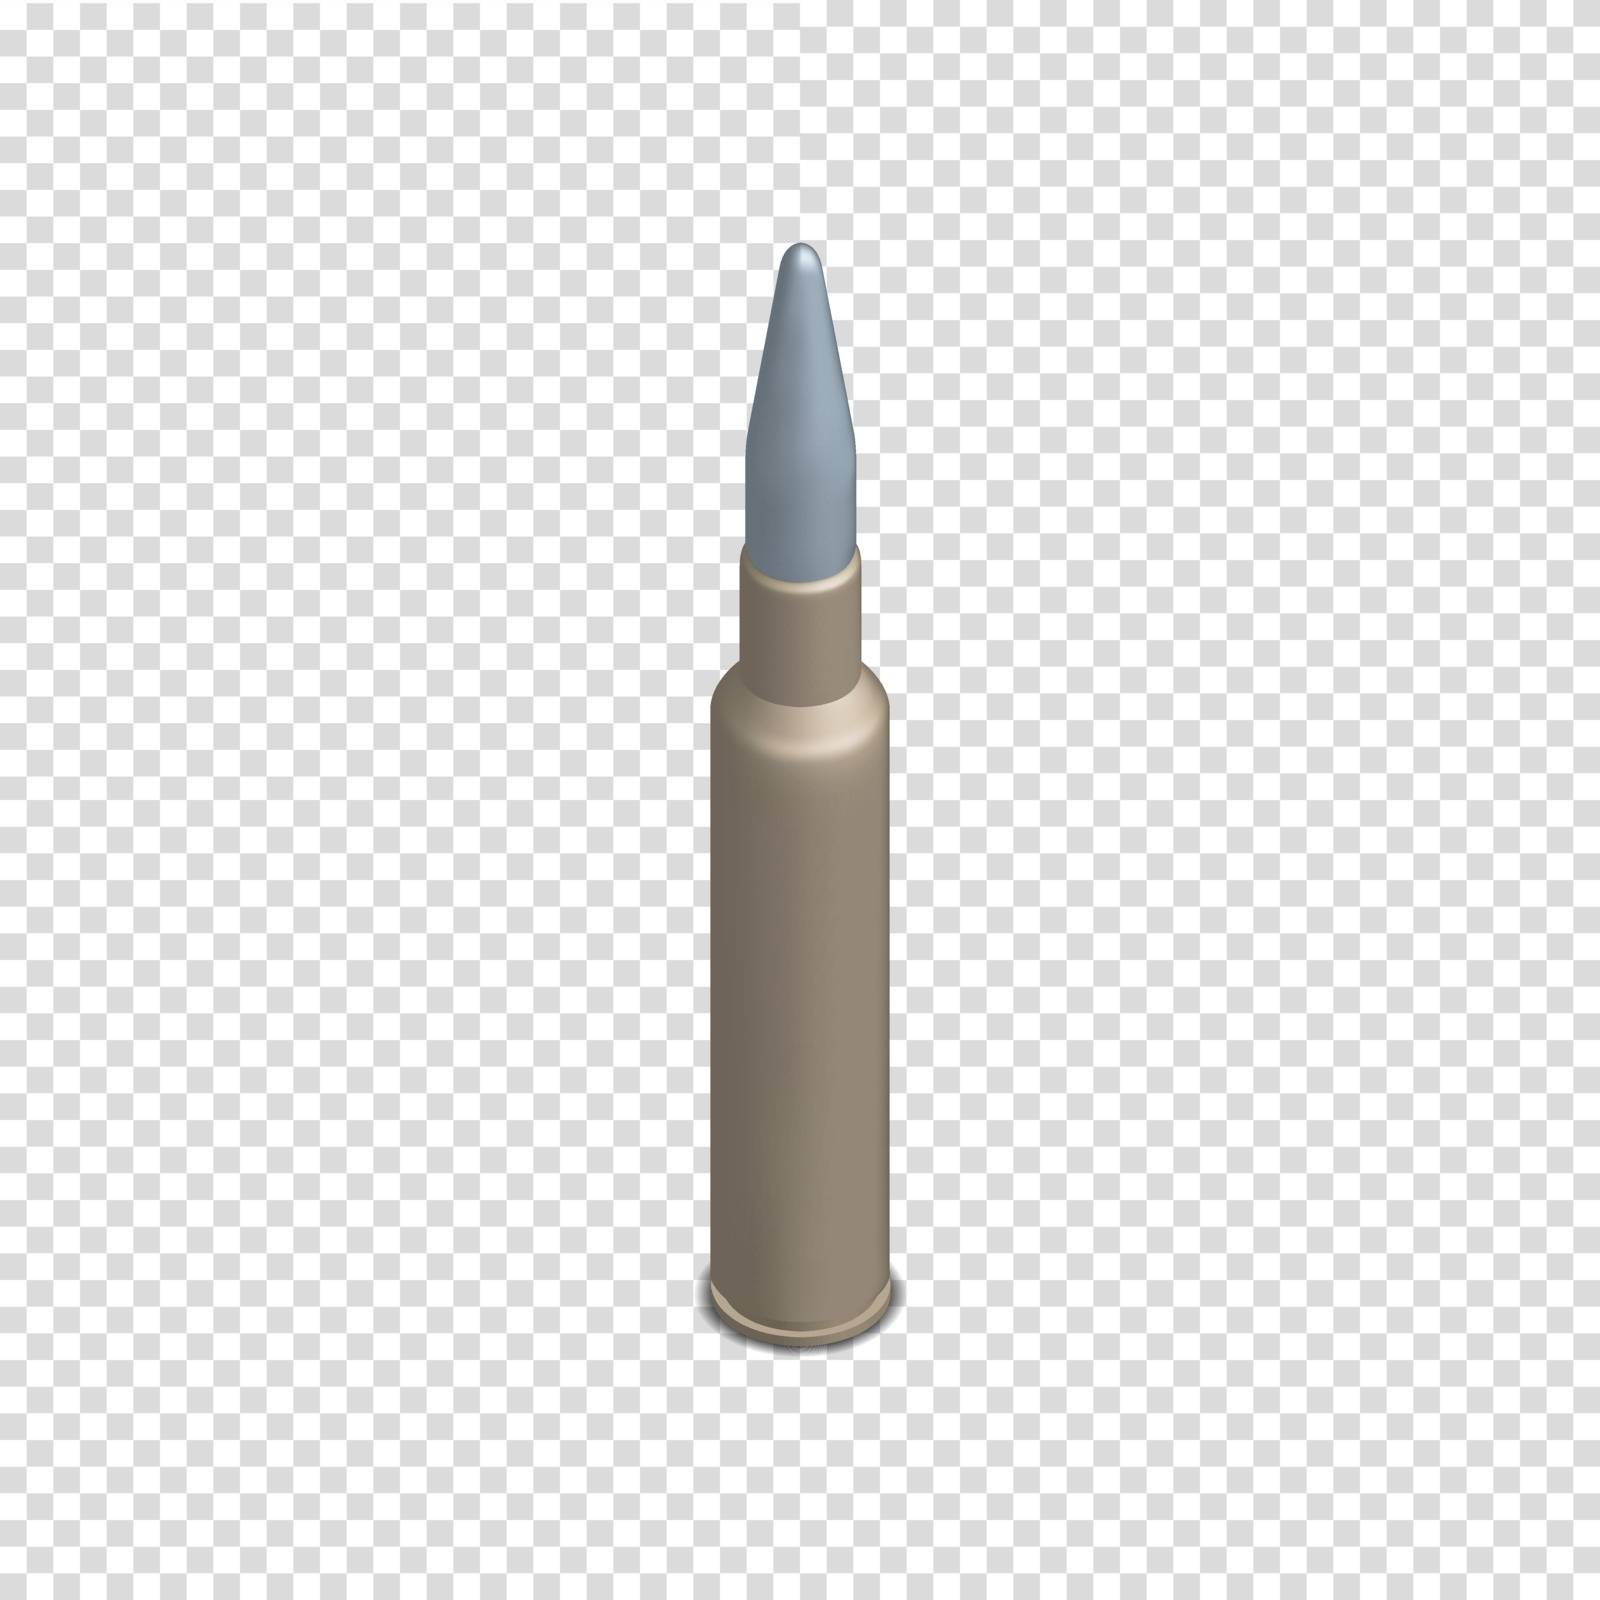 Photorealistic cartridge with a bullet isolated on white background. Design element firearms. 3D isometric style, vector illustration.